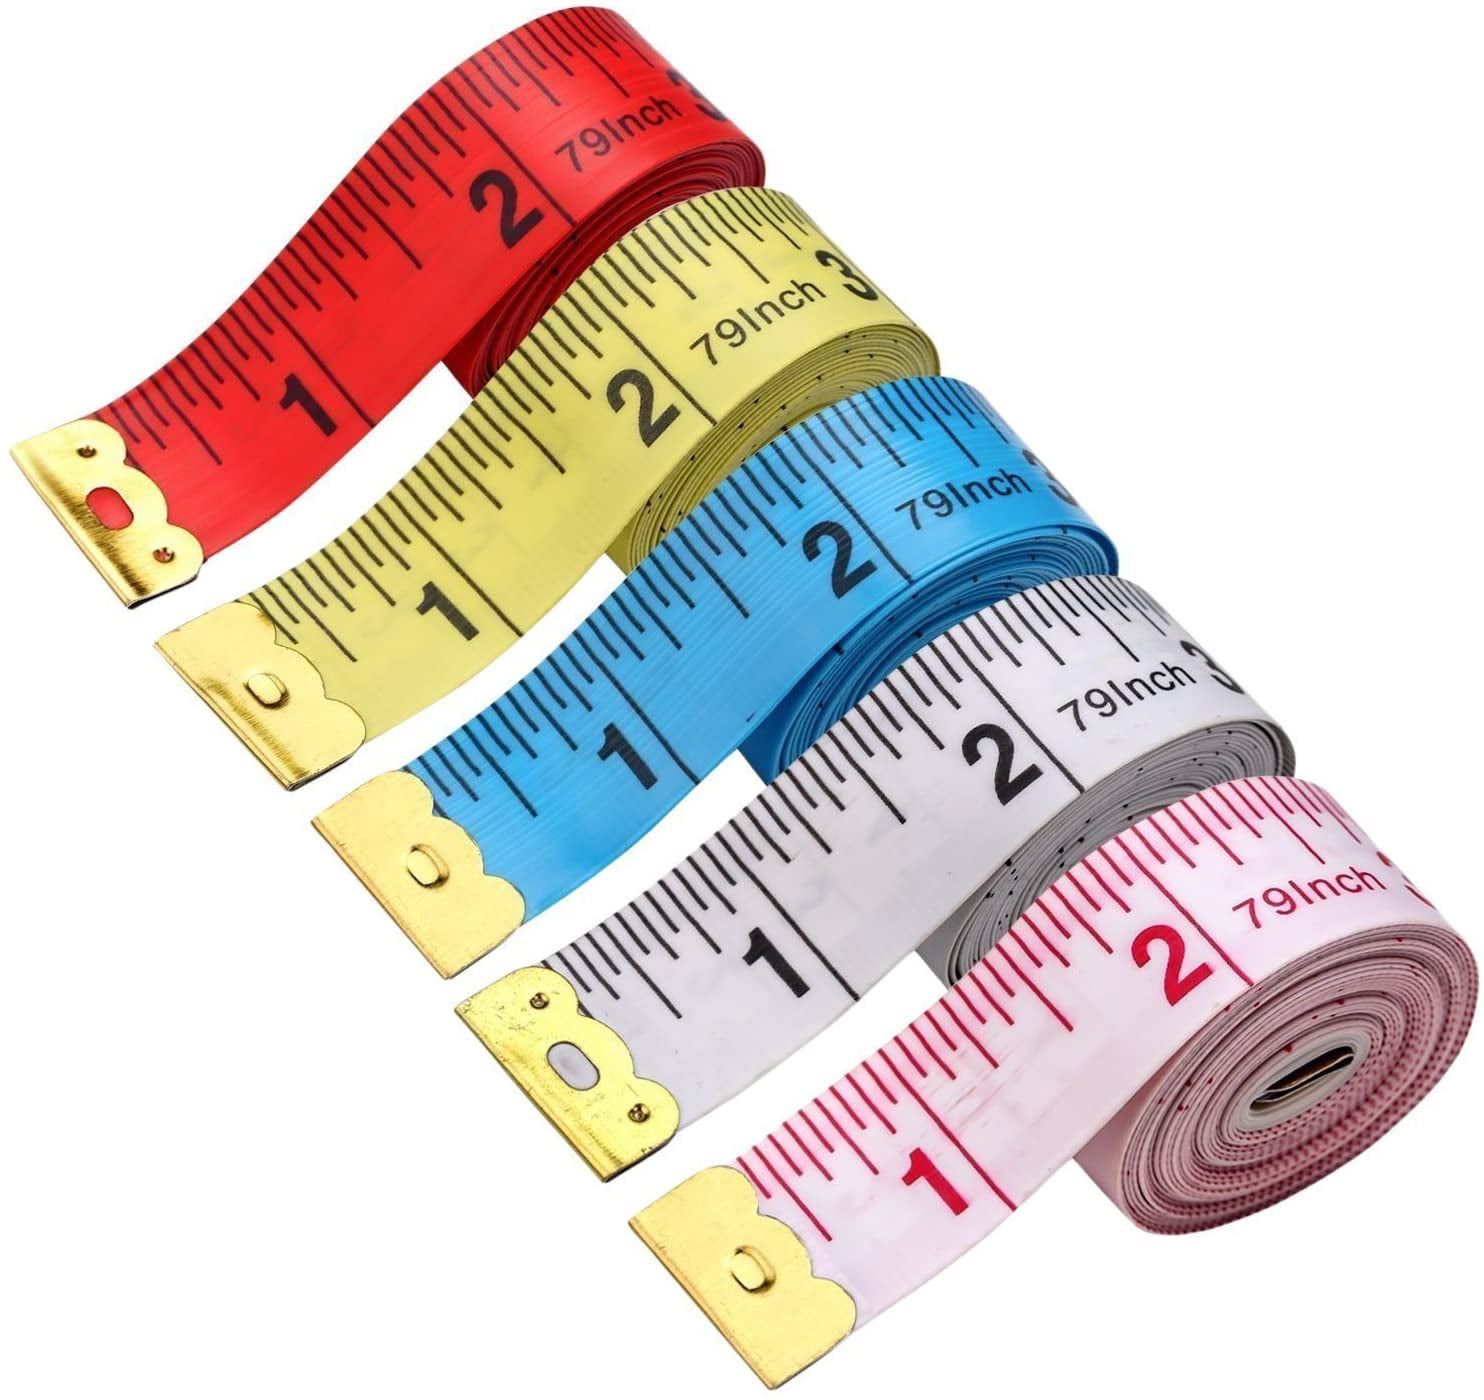 B2G1 Free Body Measuring Sewing Cloth Tailor Tape Measure Soft Flat Ruler 60"